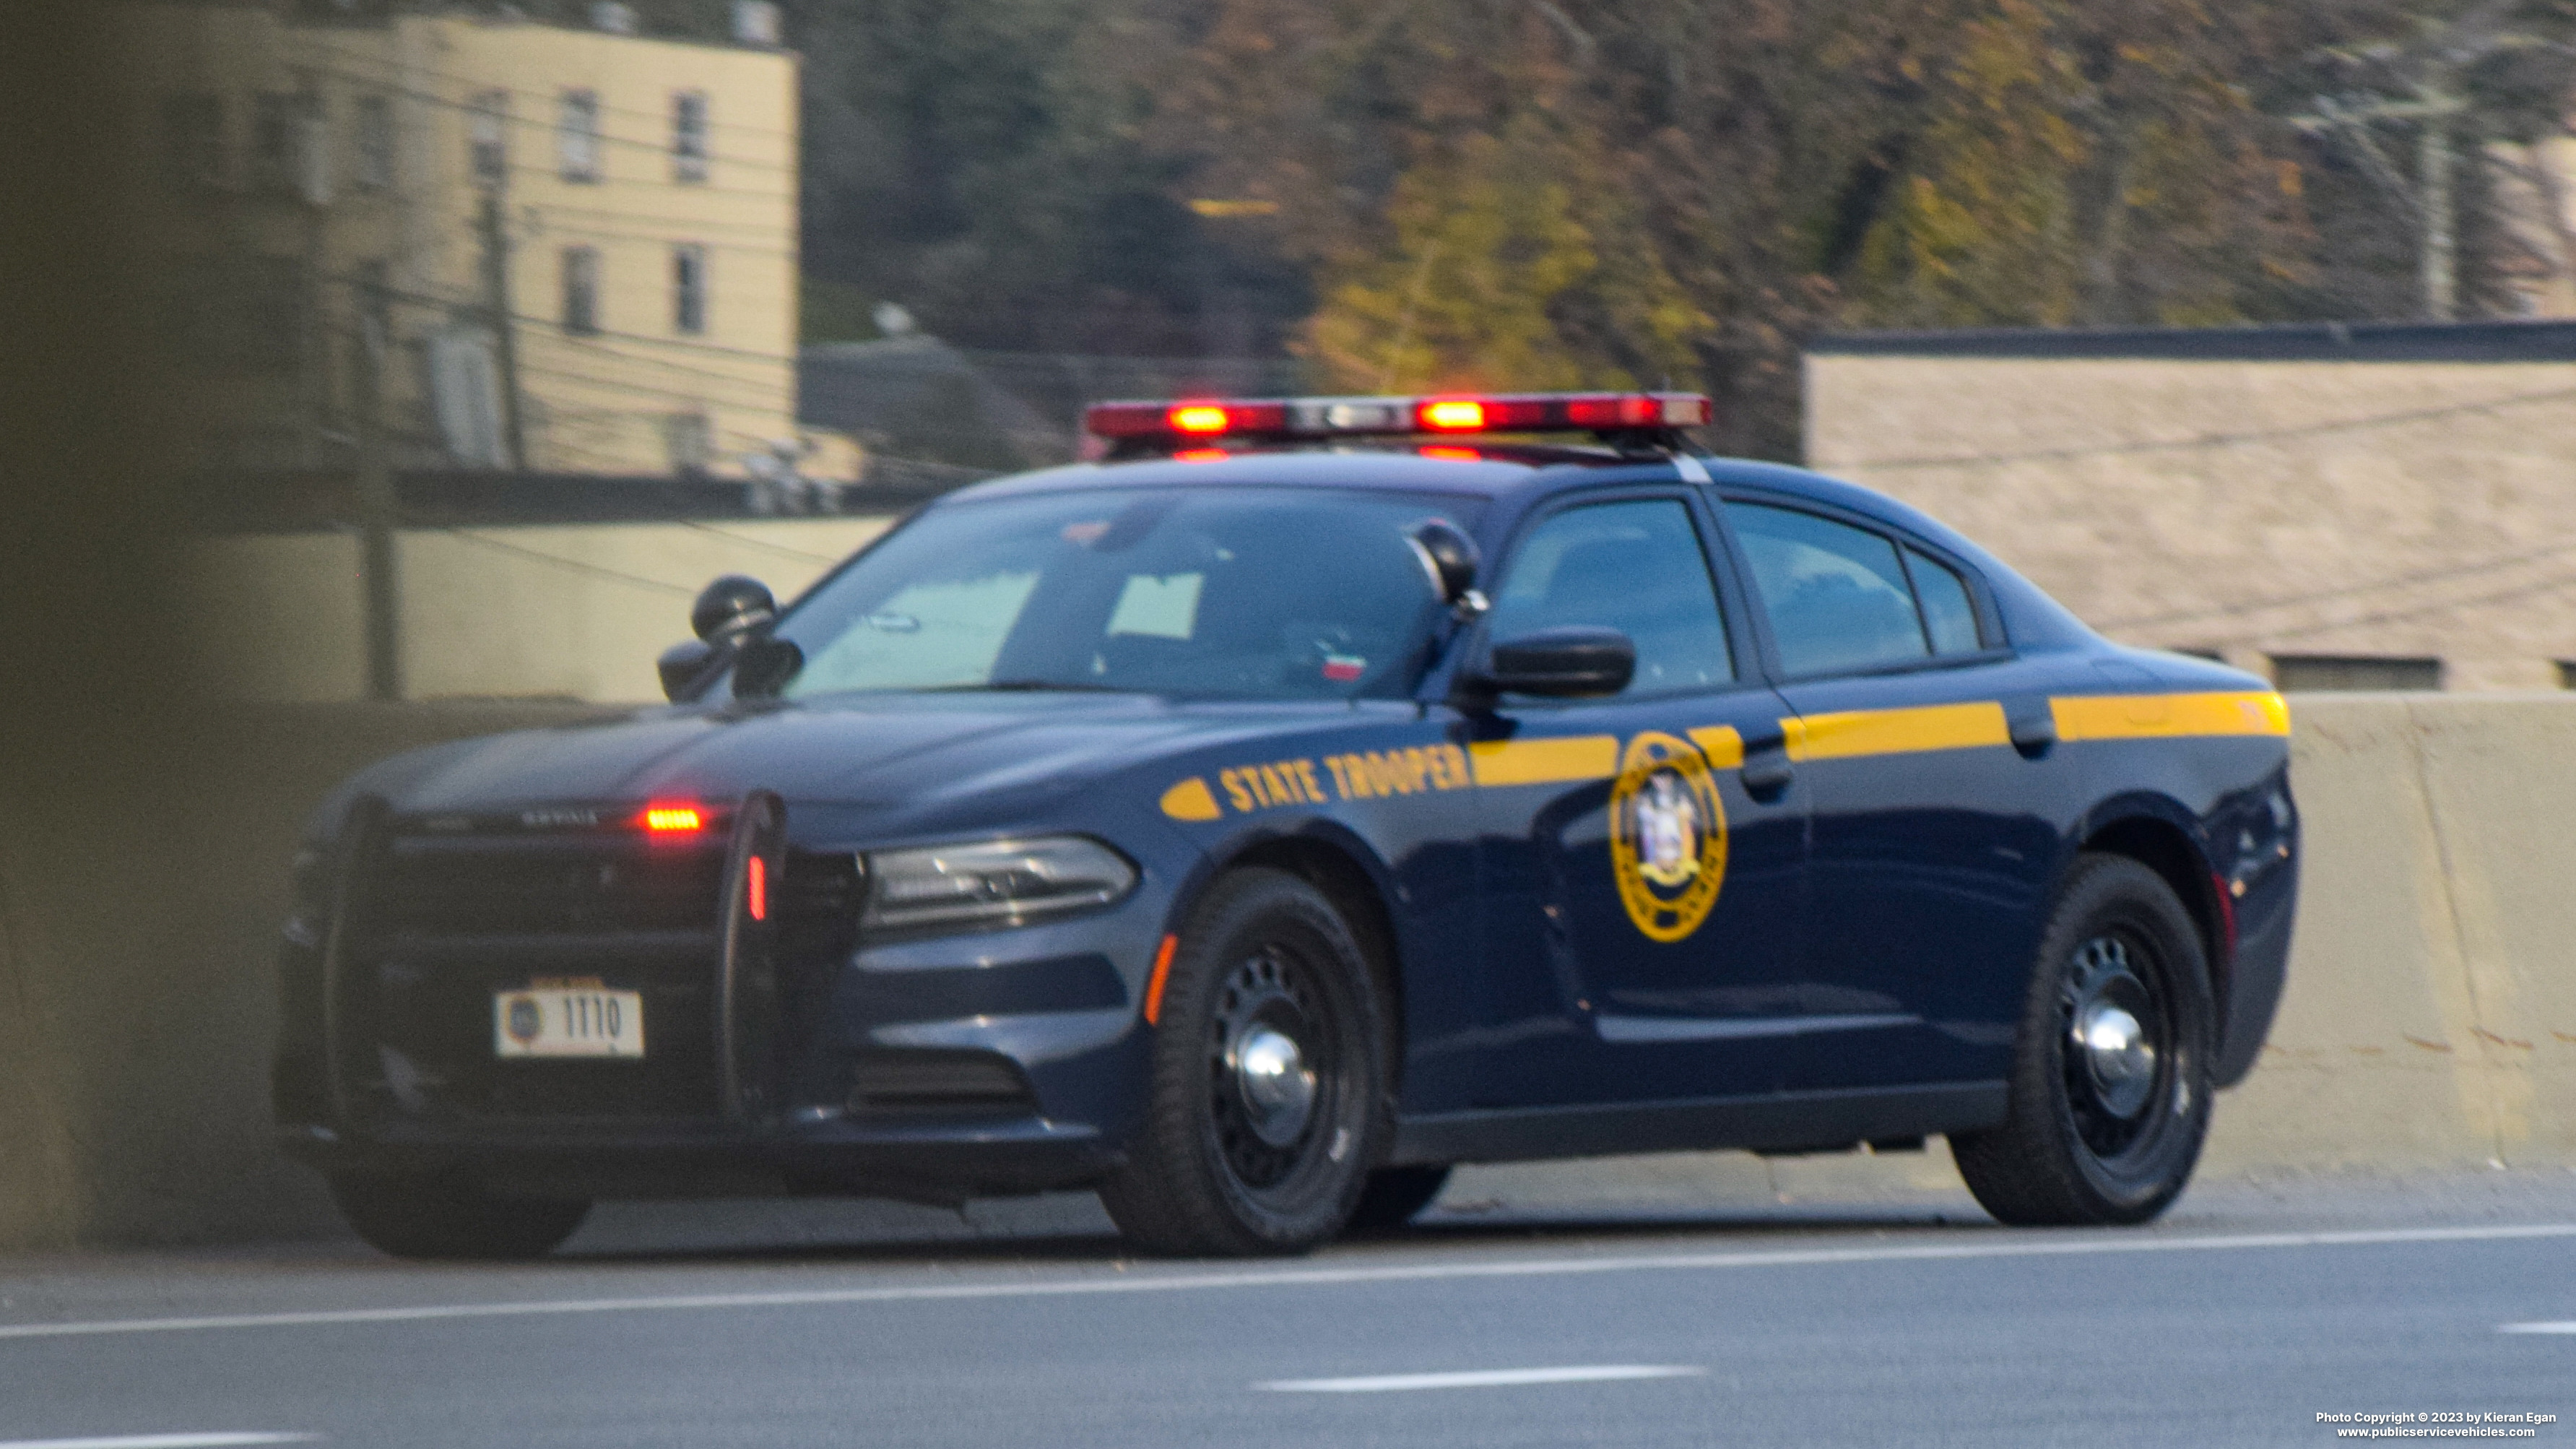 A photo  of New York State Police
            Cruiser 1T10, a 2015-2019 Dodge Charger             taken by Kieran Egan